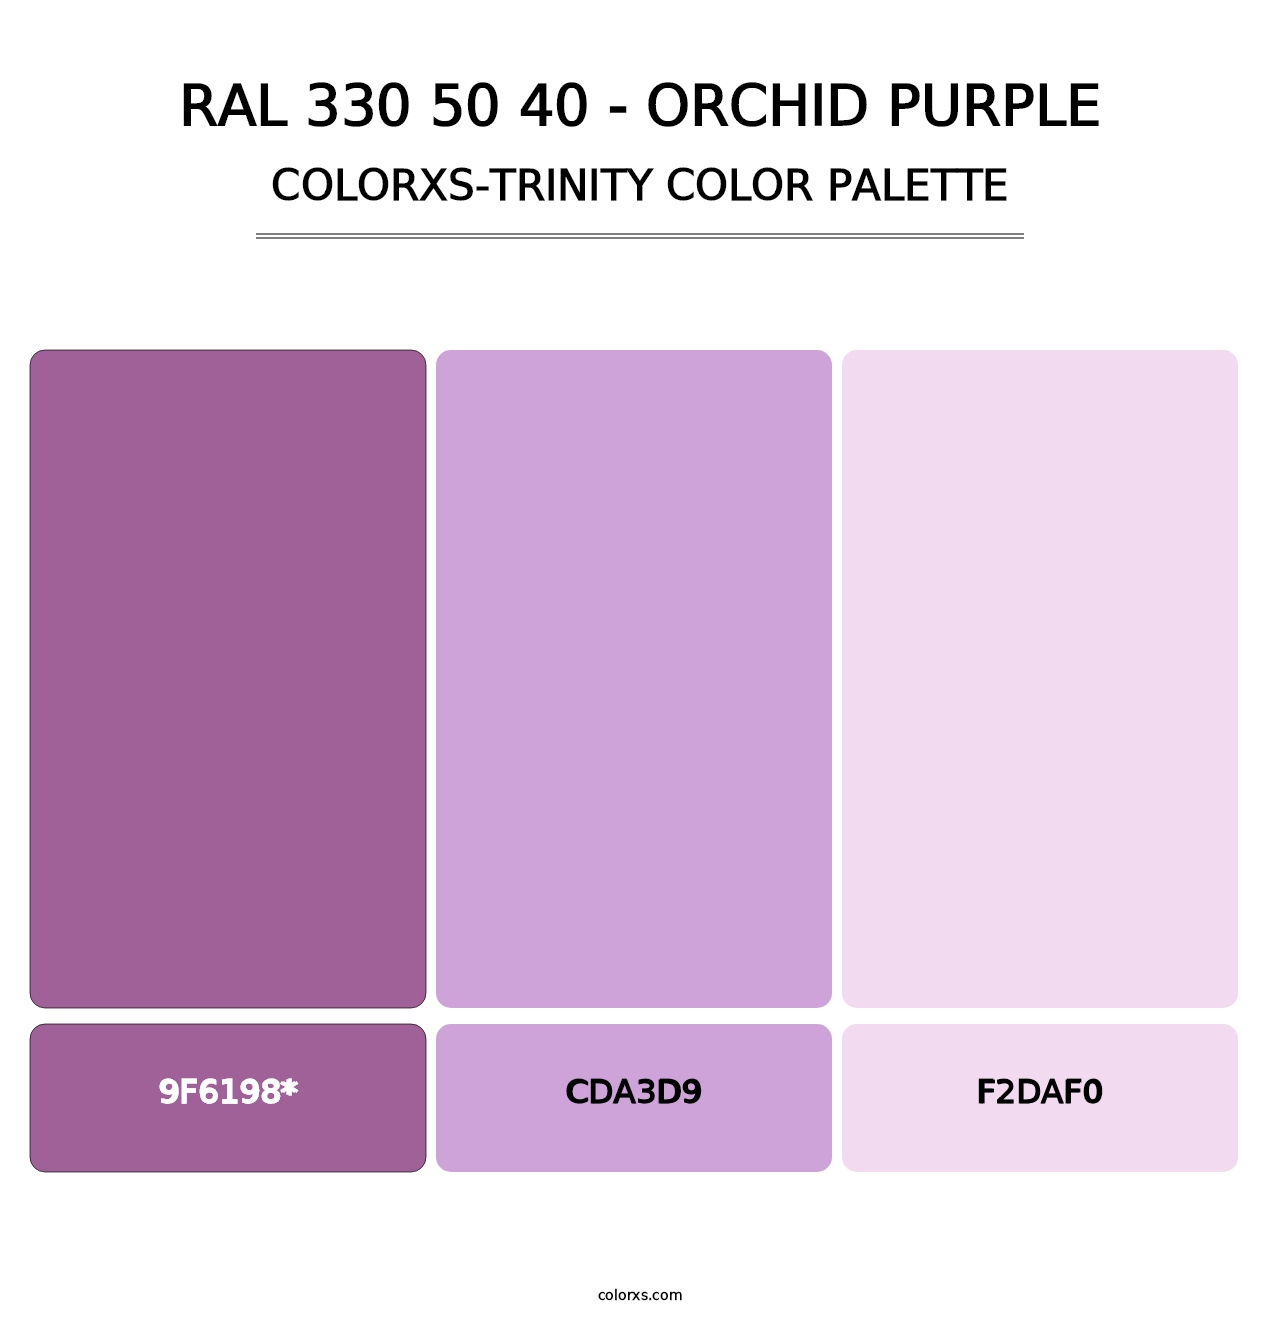 RAL 330 50 40 - Orchid Purple - Colorxs Trinity Palette